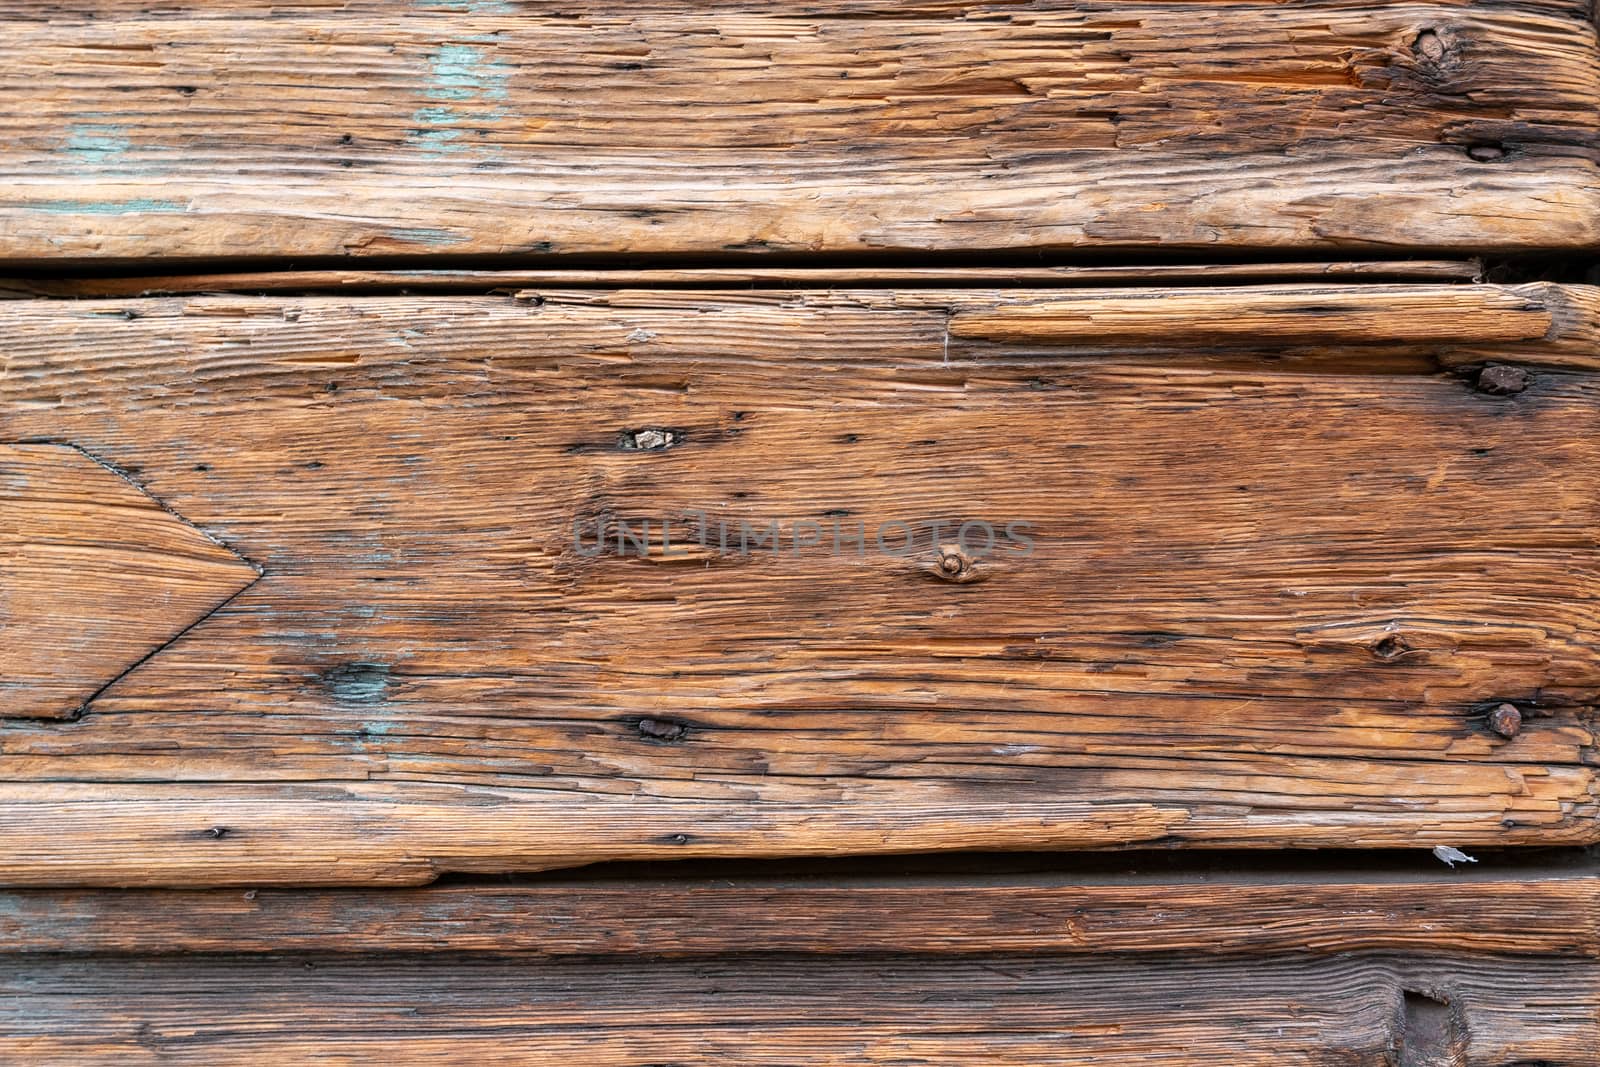 Vintage wooden background texture surface by Robertobinetti70